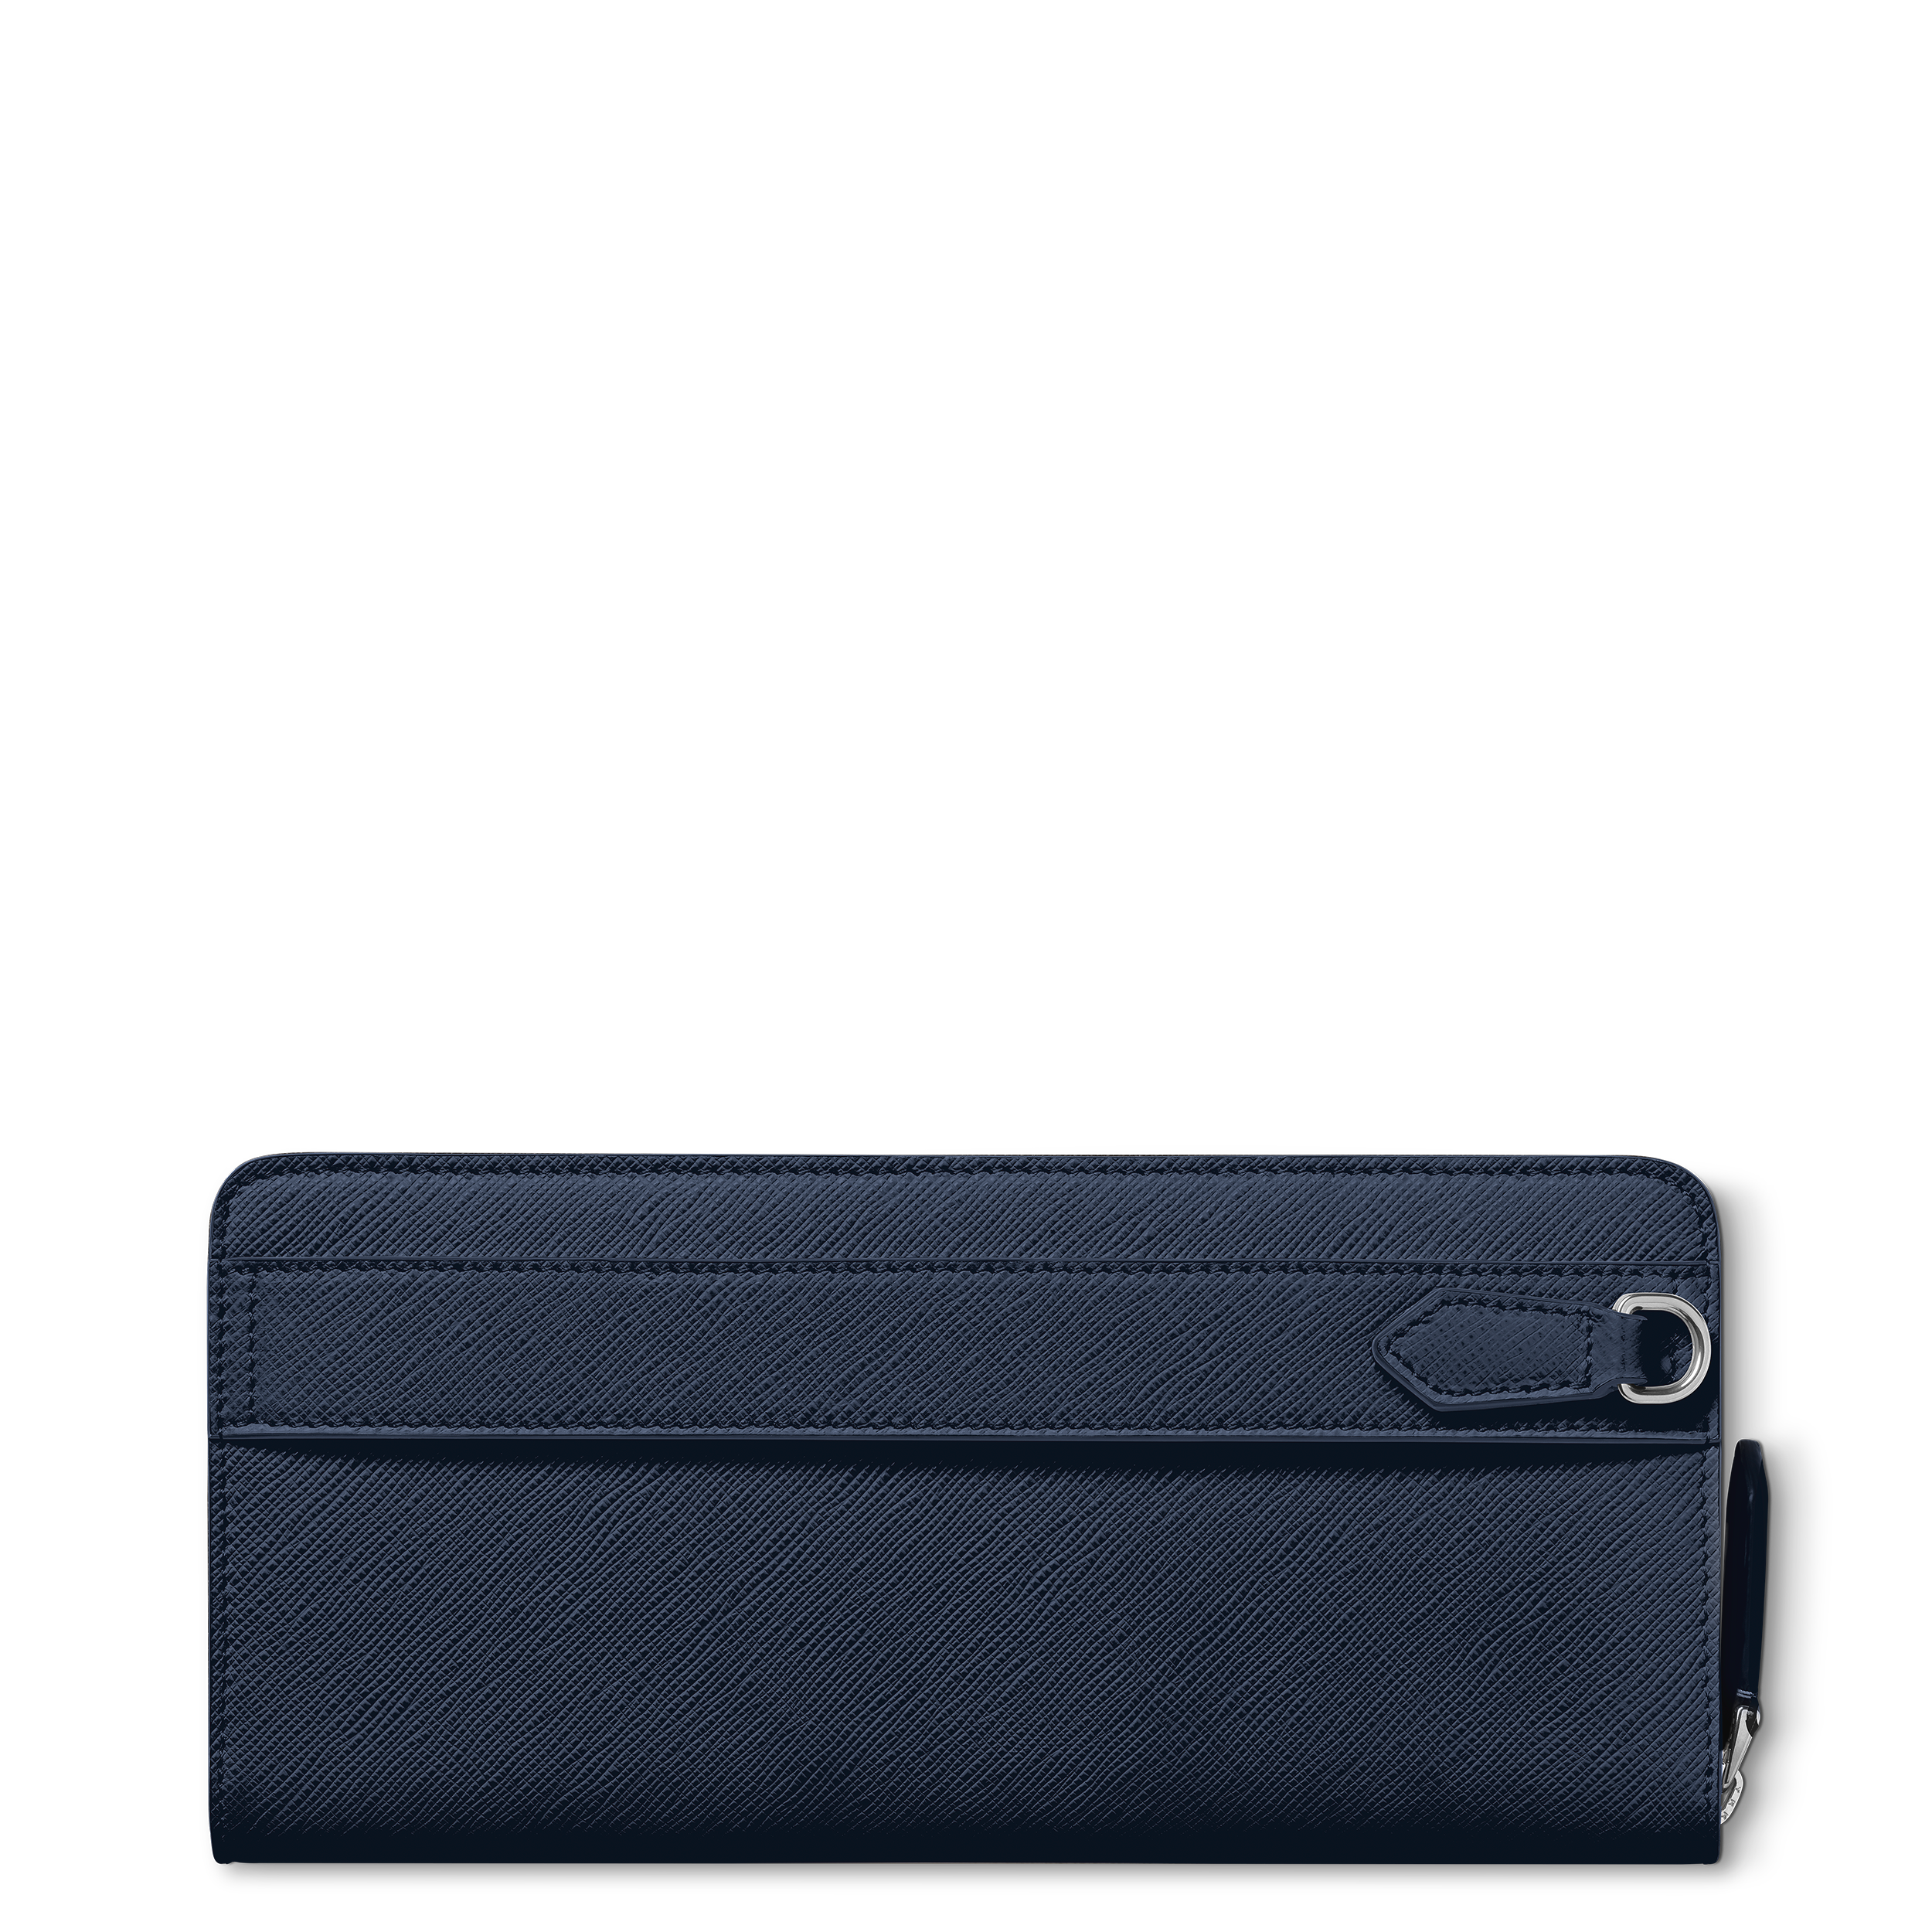 Montblanc Sartorial phone pouch, image 9